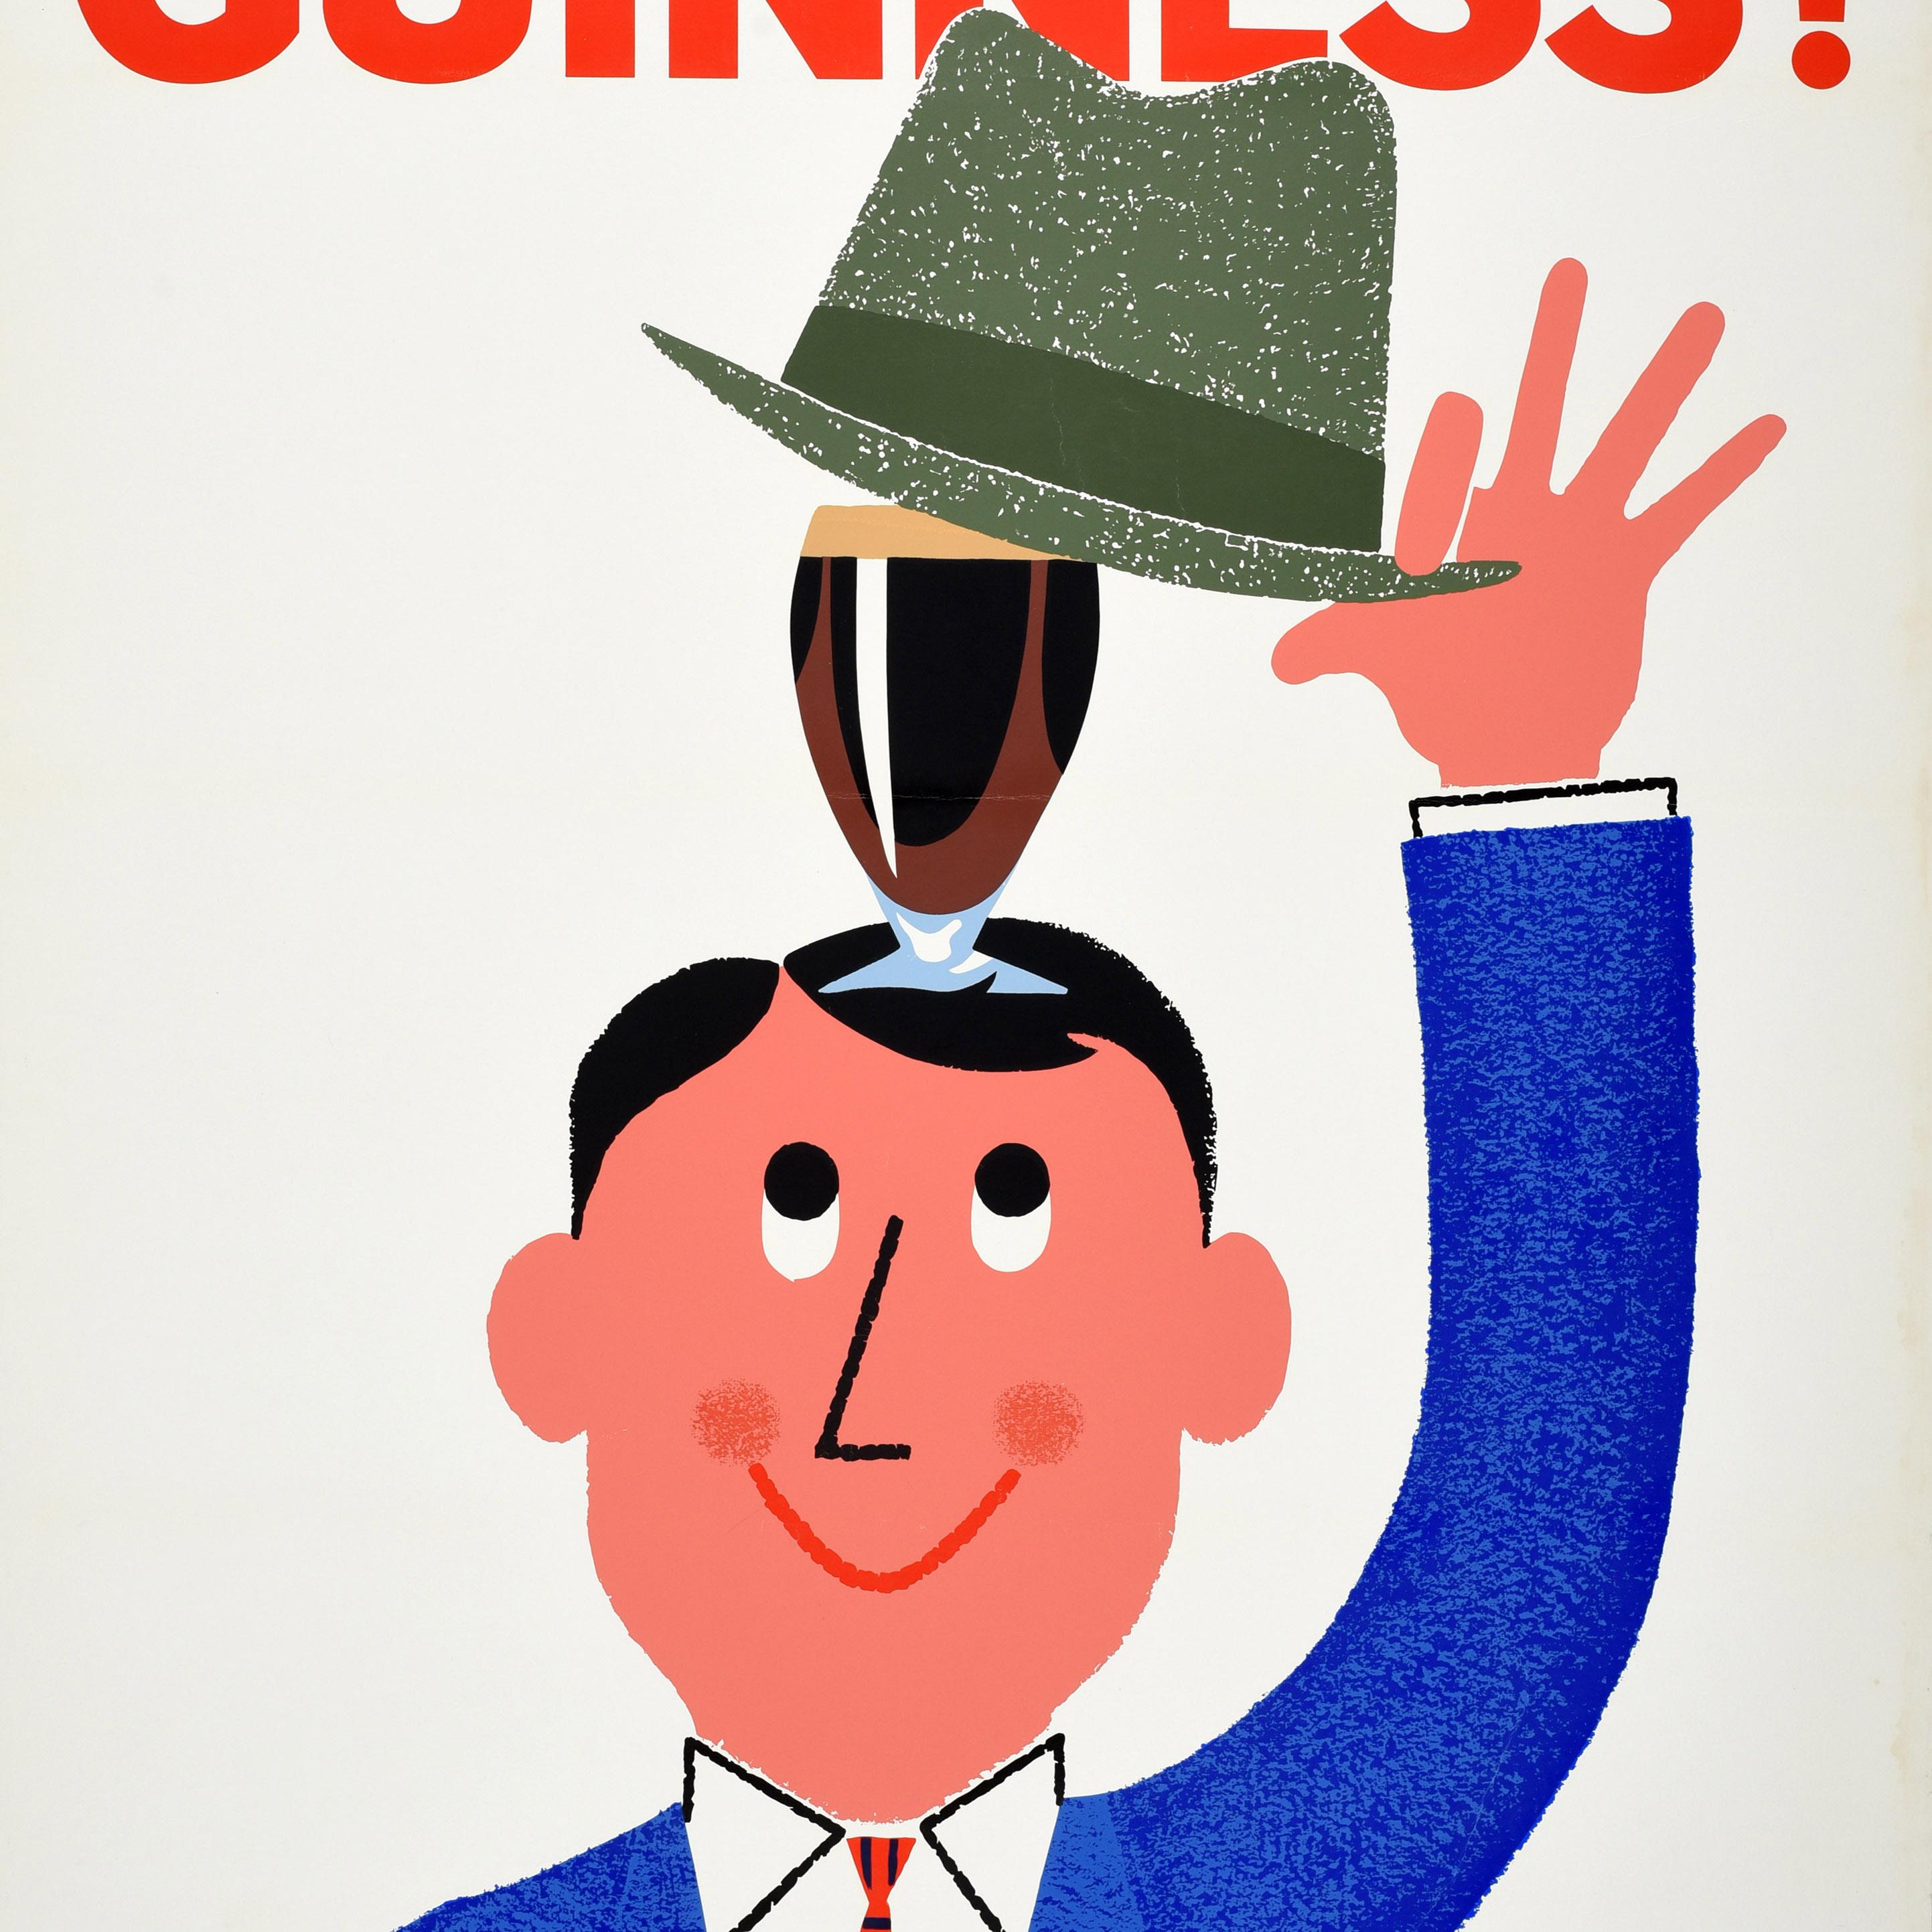 Original vintage advertising poster for the iconic drink Guinness Irish stout beer - Goodness! Guinness! - featuring a fun design of a man wearing a blue suit and red tie lifting up his hat to reveal a pint glass of Guinness on his head, the bold